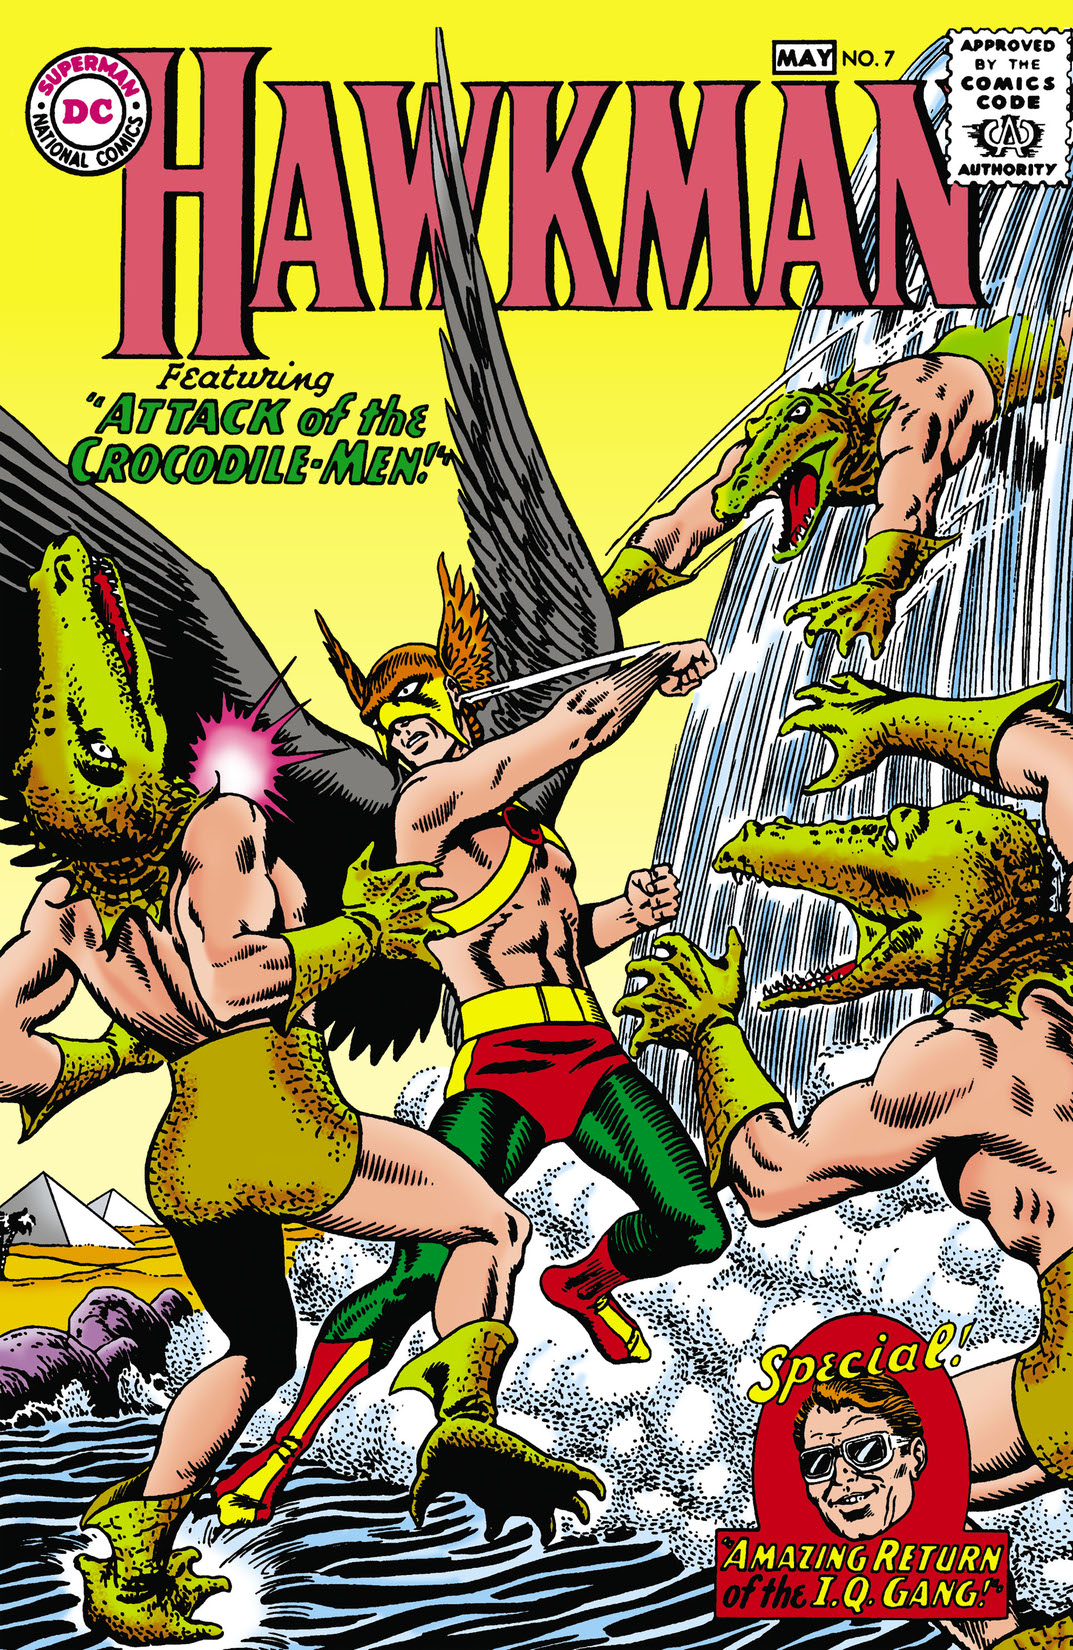 Hawkman (1964-) #7 preview images